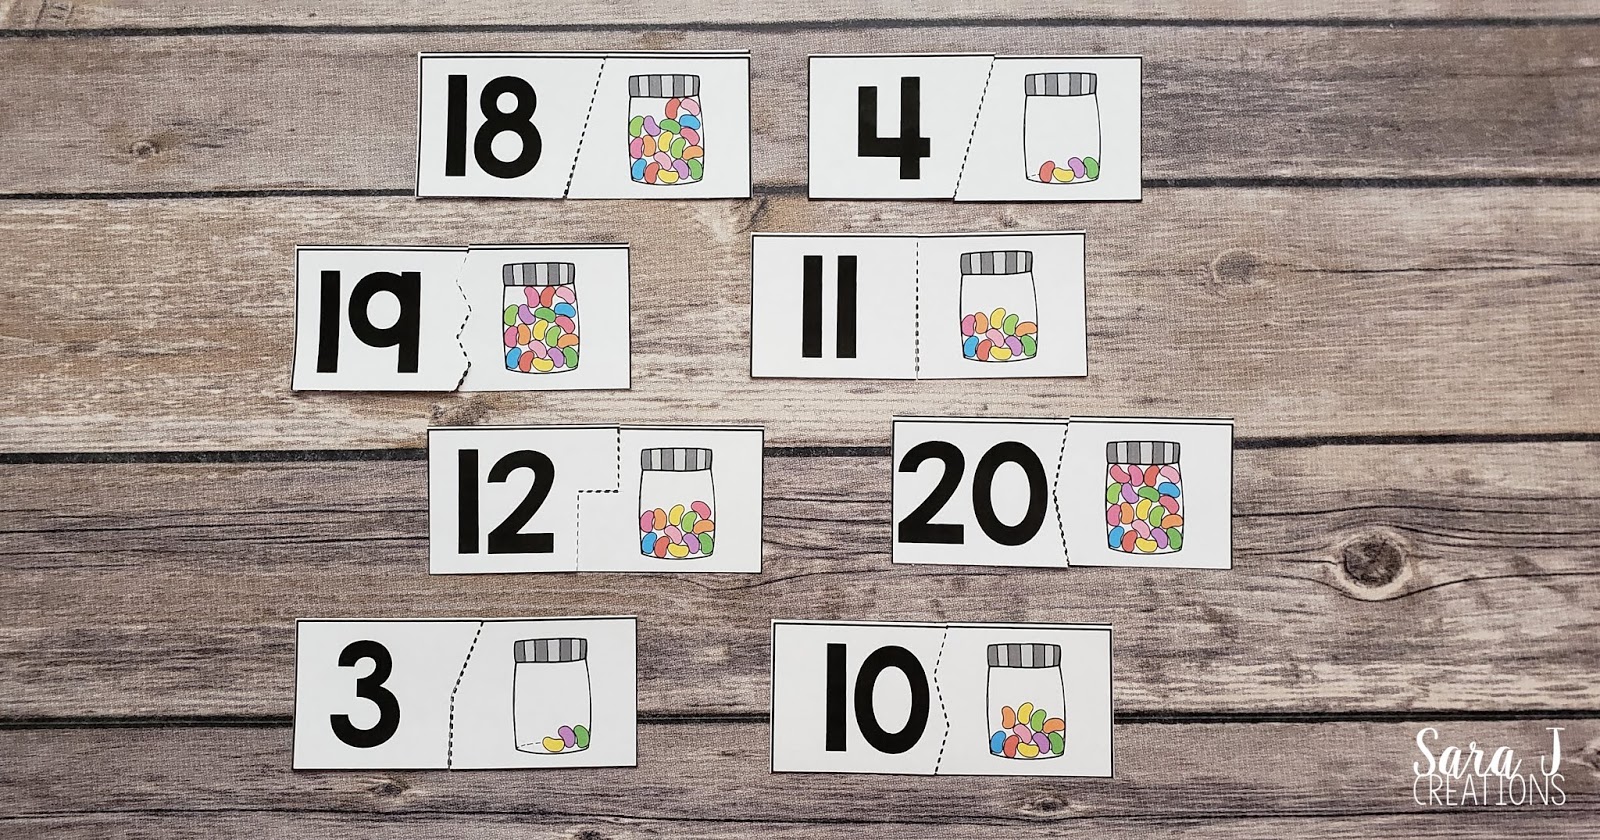 Help your preschool or kindergarten students practice counting the numbers 1-20 with these free candy counting puzzles. These printables make an easy to use activity for centers, sensory bins, small group play, math time and more.